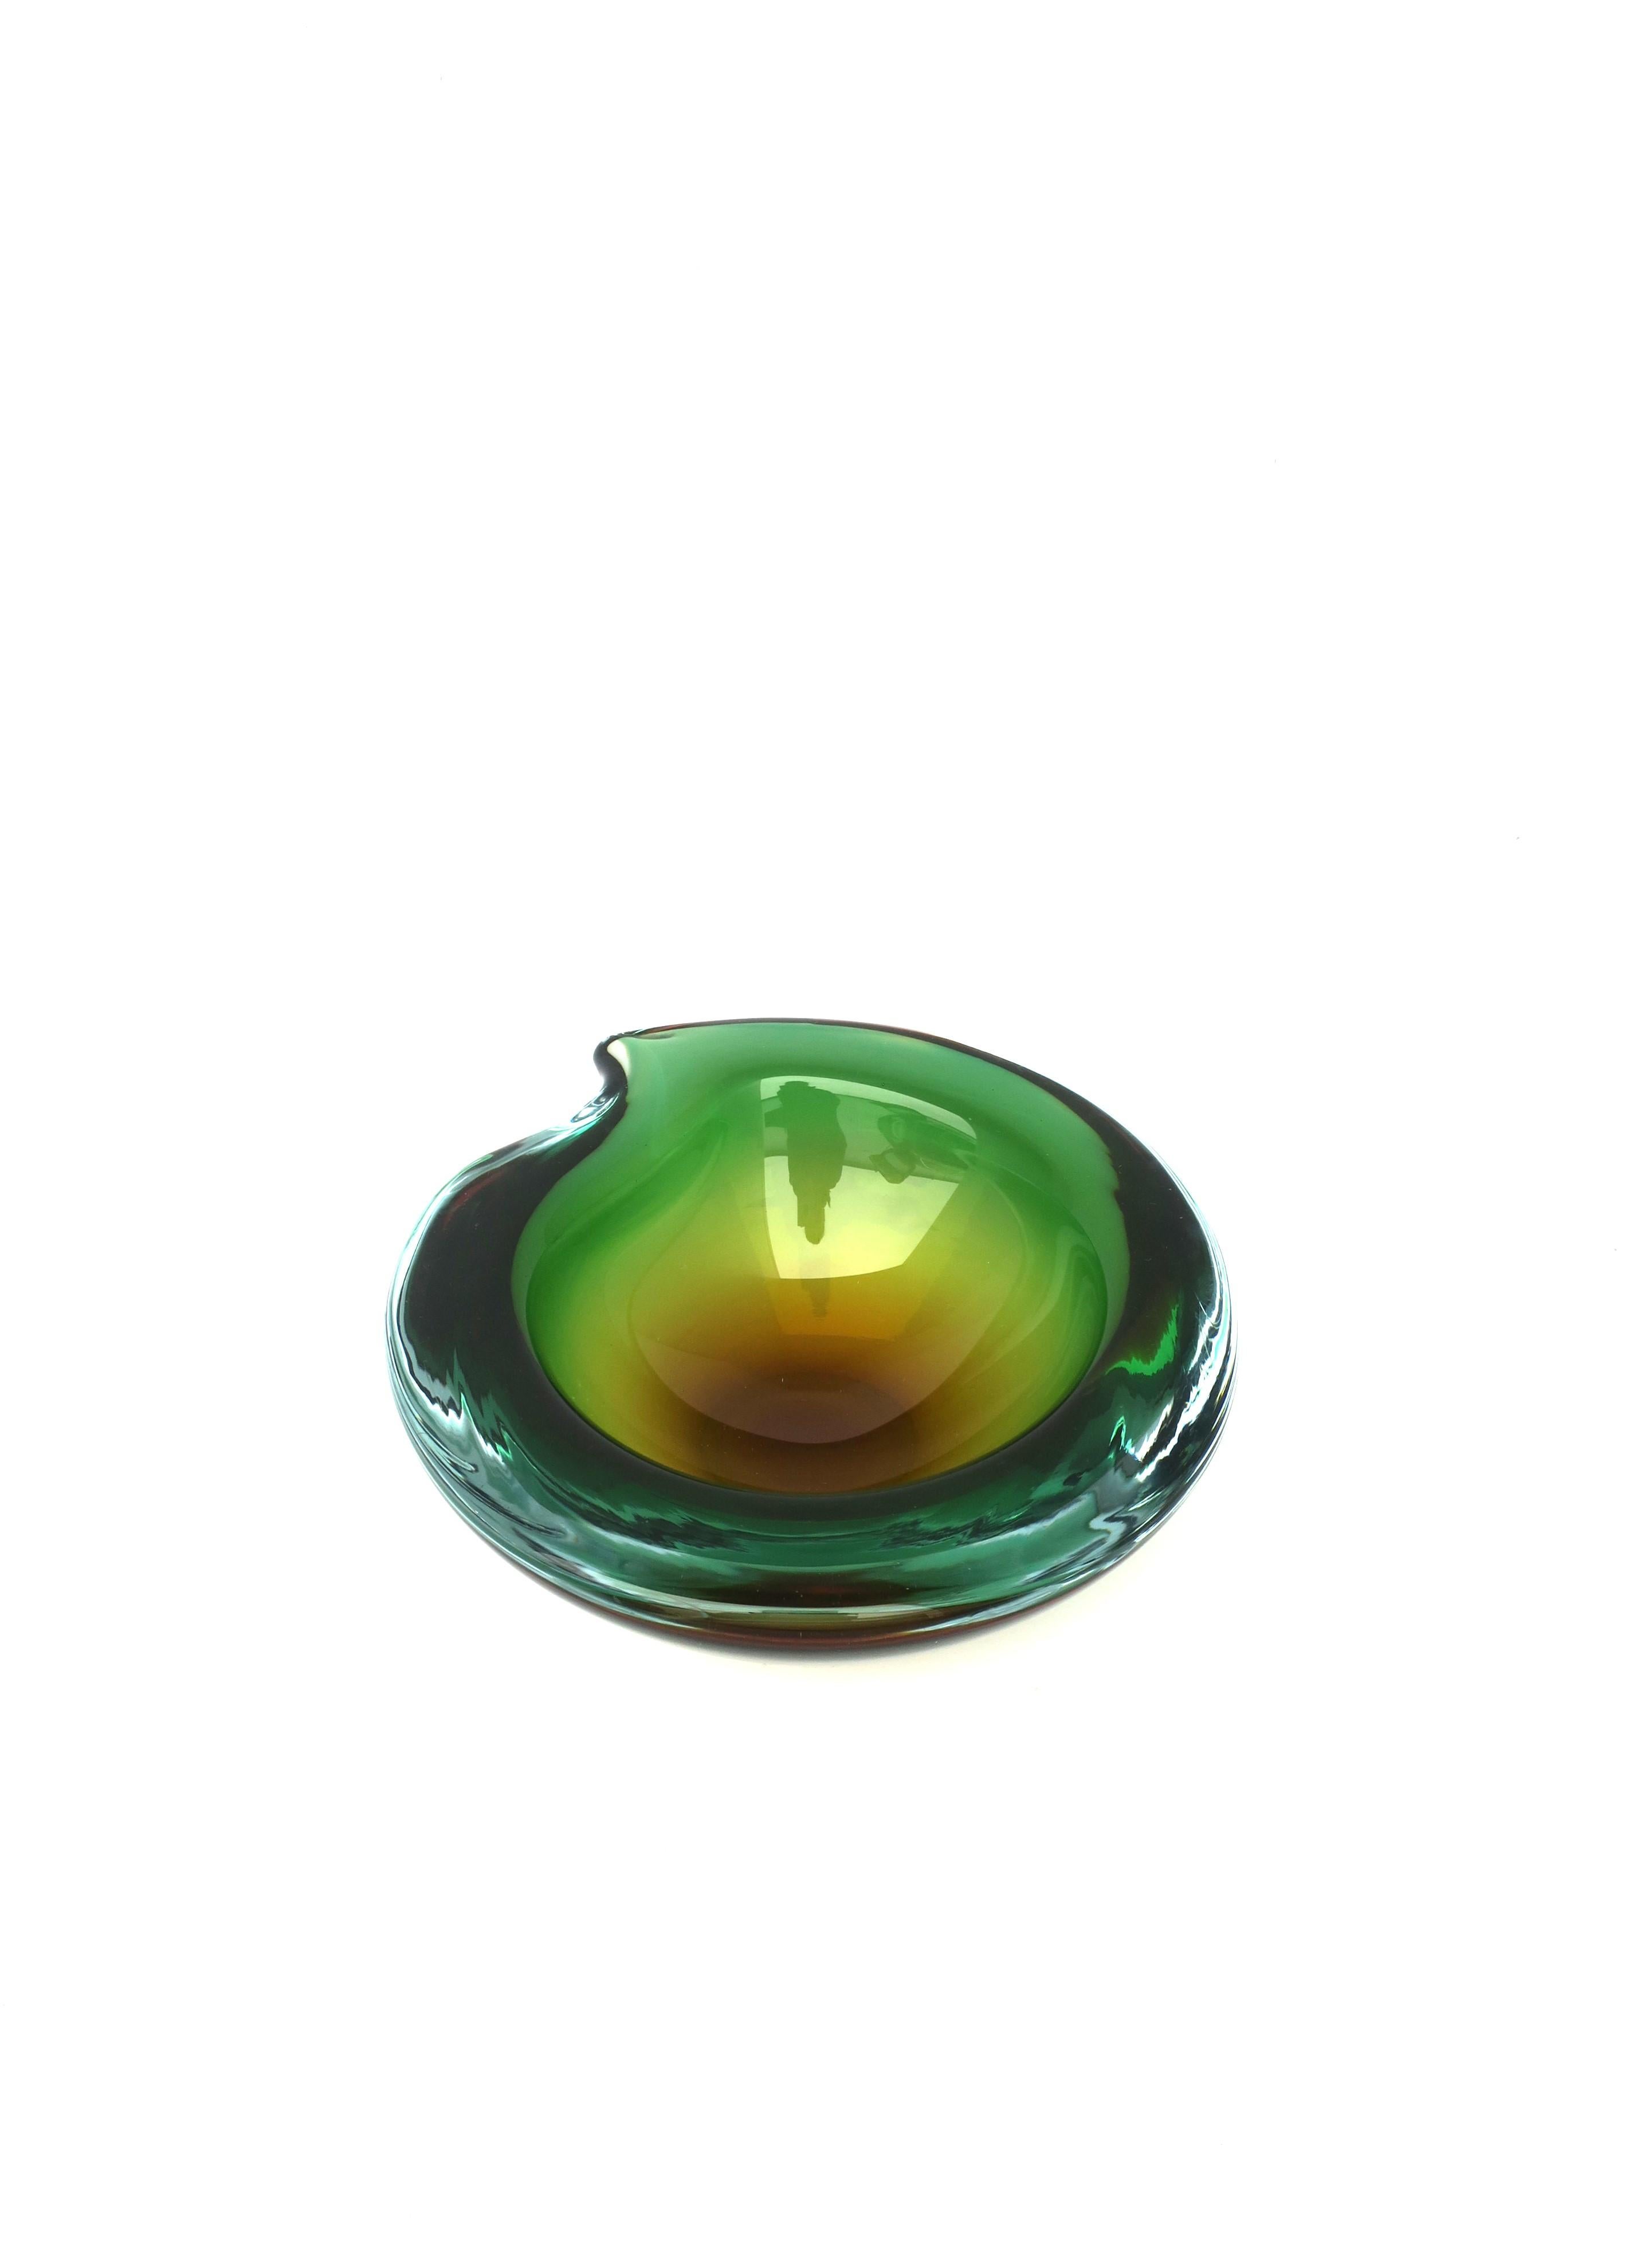 A substantial Italian Murano 'Sommerso' bowl in light blue, green and yellow art glass hues attributed to the Seguso atelier, circa mid-20th century, 1960s, Italy. Bowl is substantial as shown from top view images. Great as a standalone piece, candy